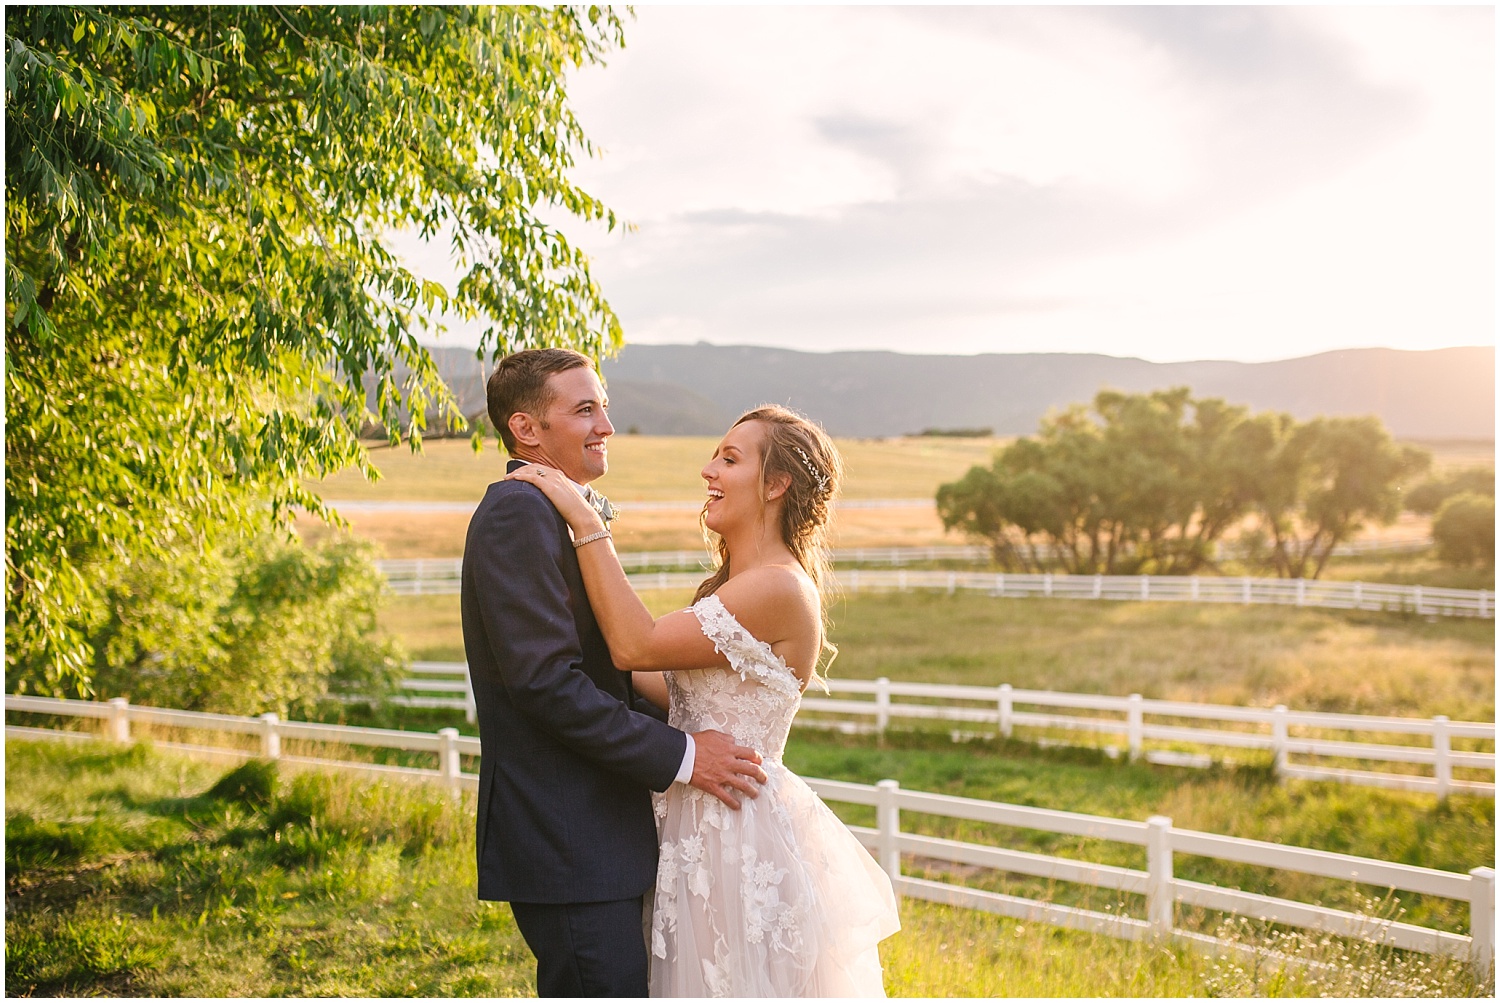 Bride and groom dance together at sunset overlooking the fields surrounding Crooked Willow Farms